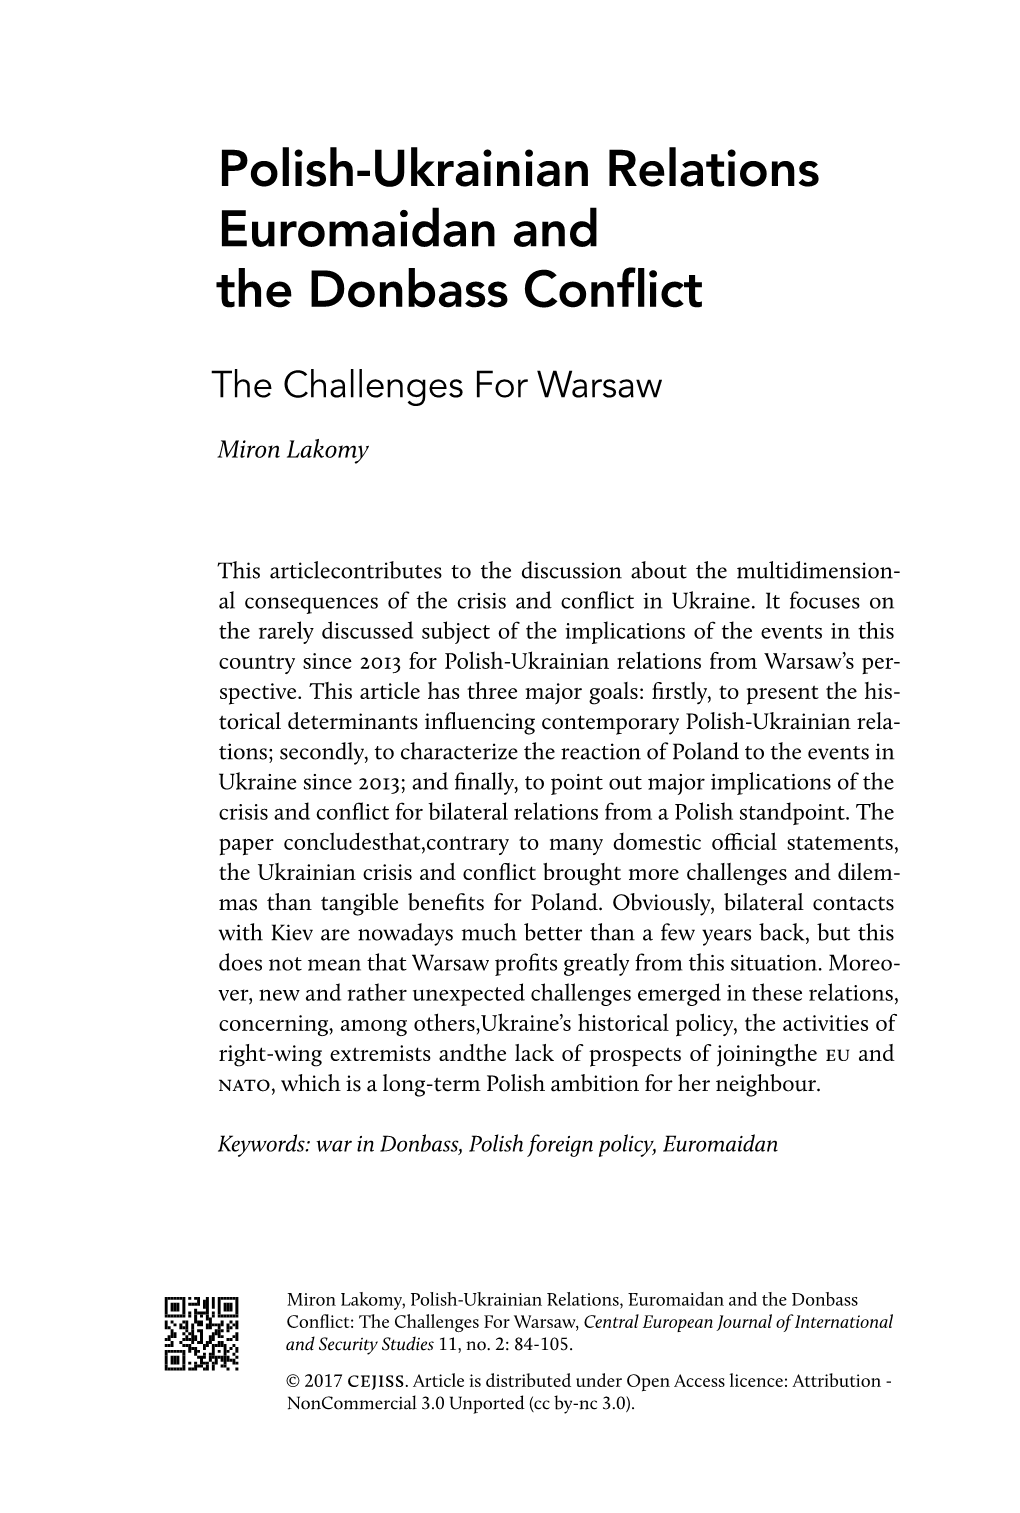 Polish-Ukrainian Relations Euromaidan and the Donbass Conflict